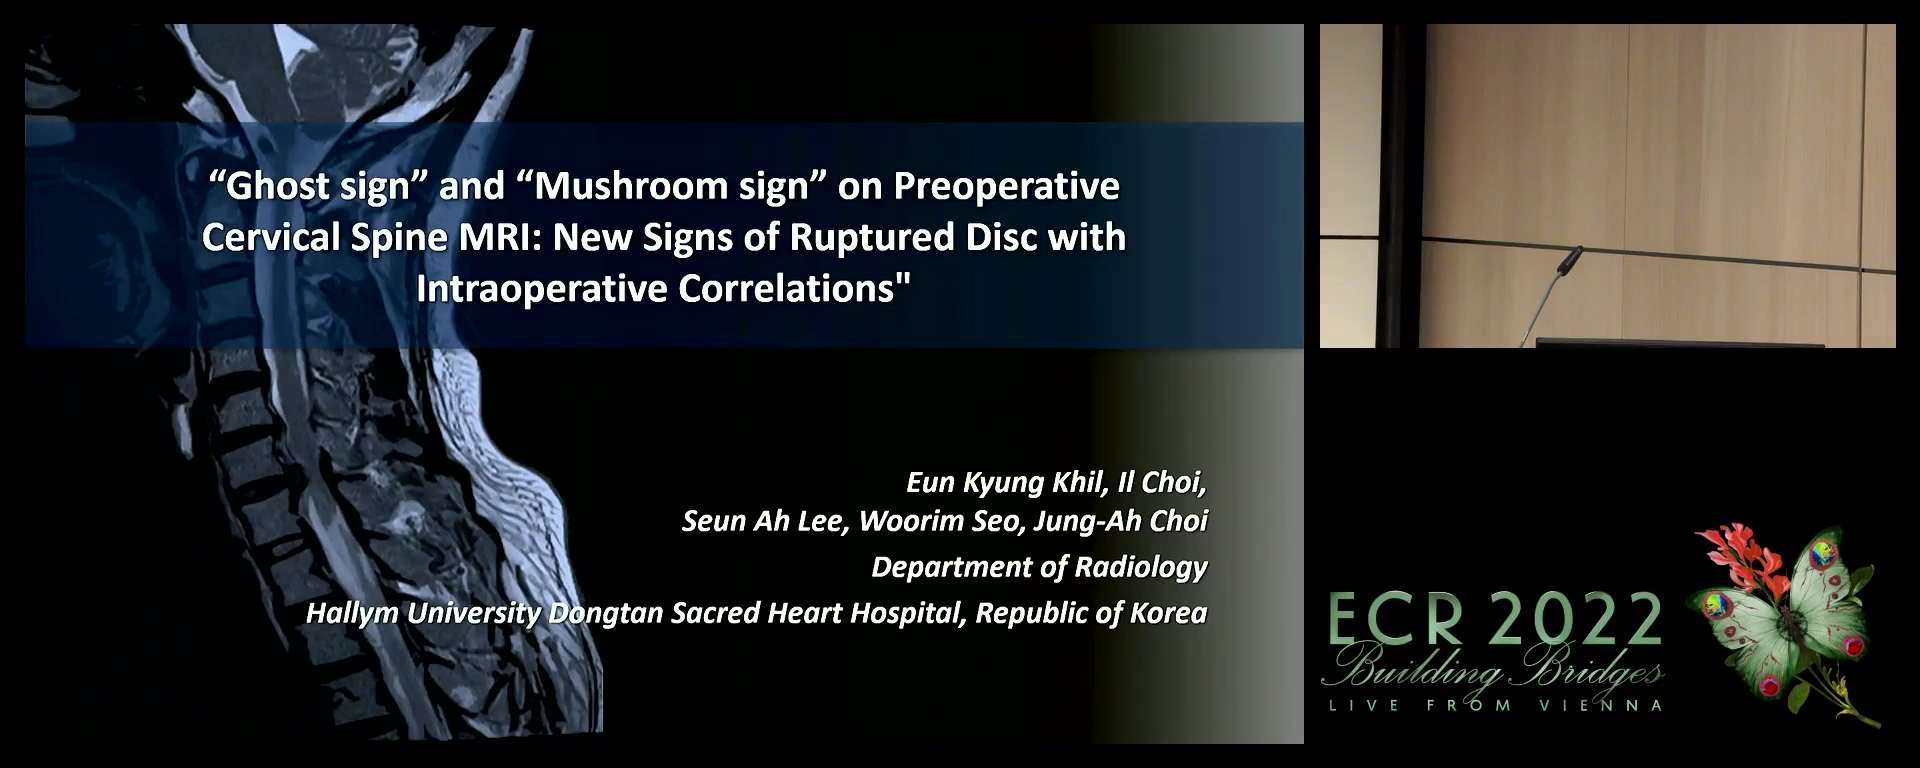 "Ghost sign" and "mushroom sign" on preoperative cervical spine MRI: new signs of ruptured disc with intraoperative correlations